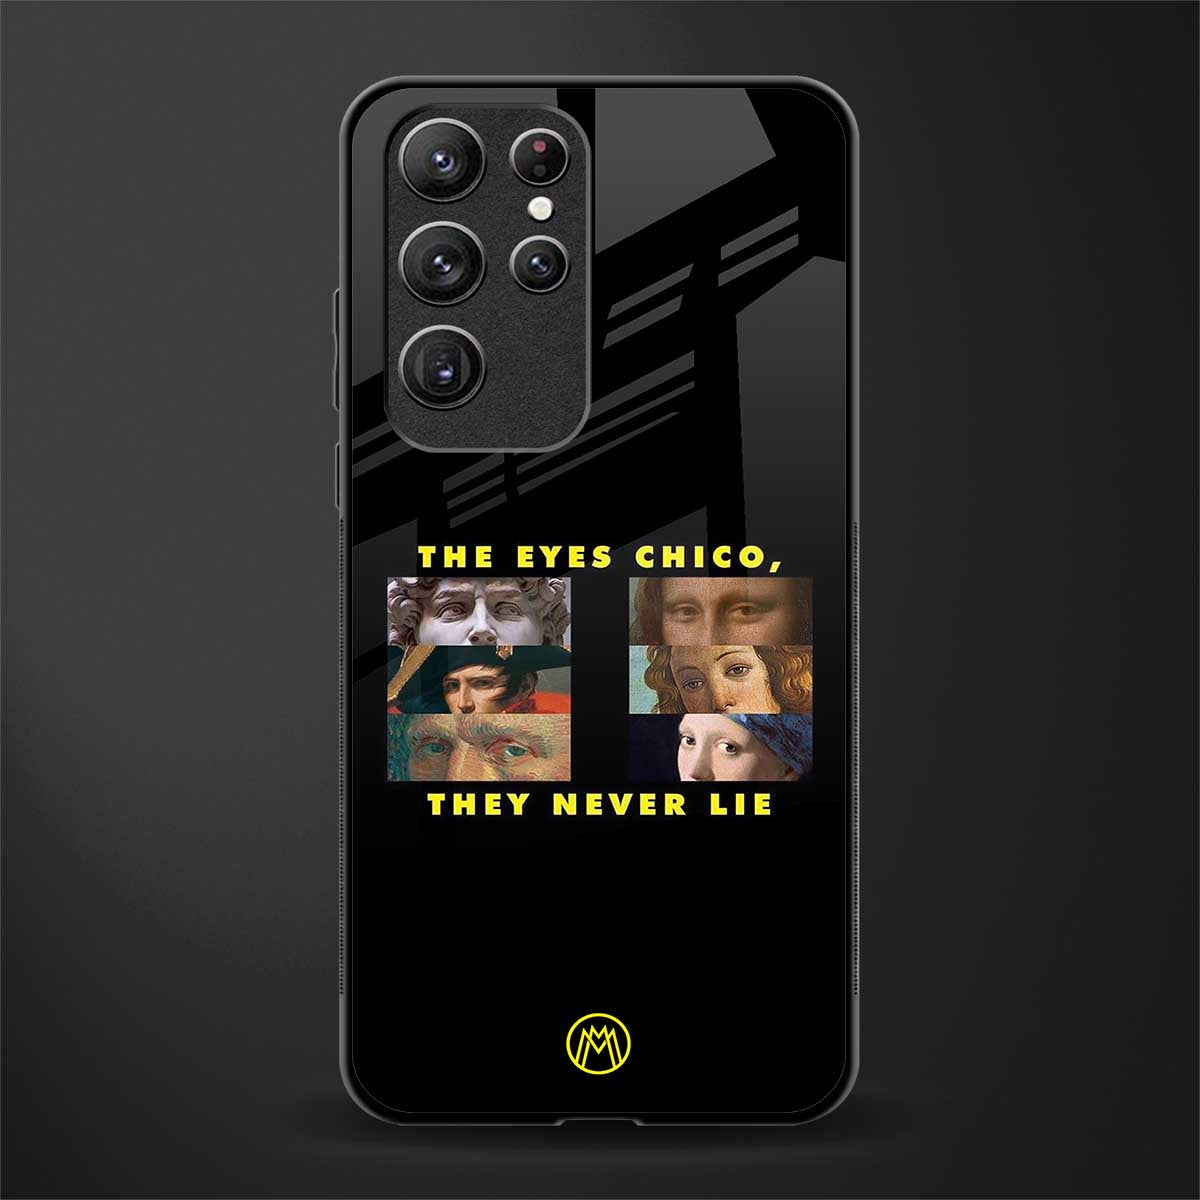 the eyes chico, they never lie movie quote glass case for samsung galaxy s22 ultra 5g image